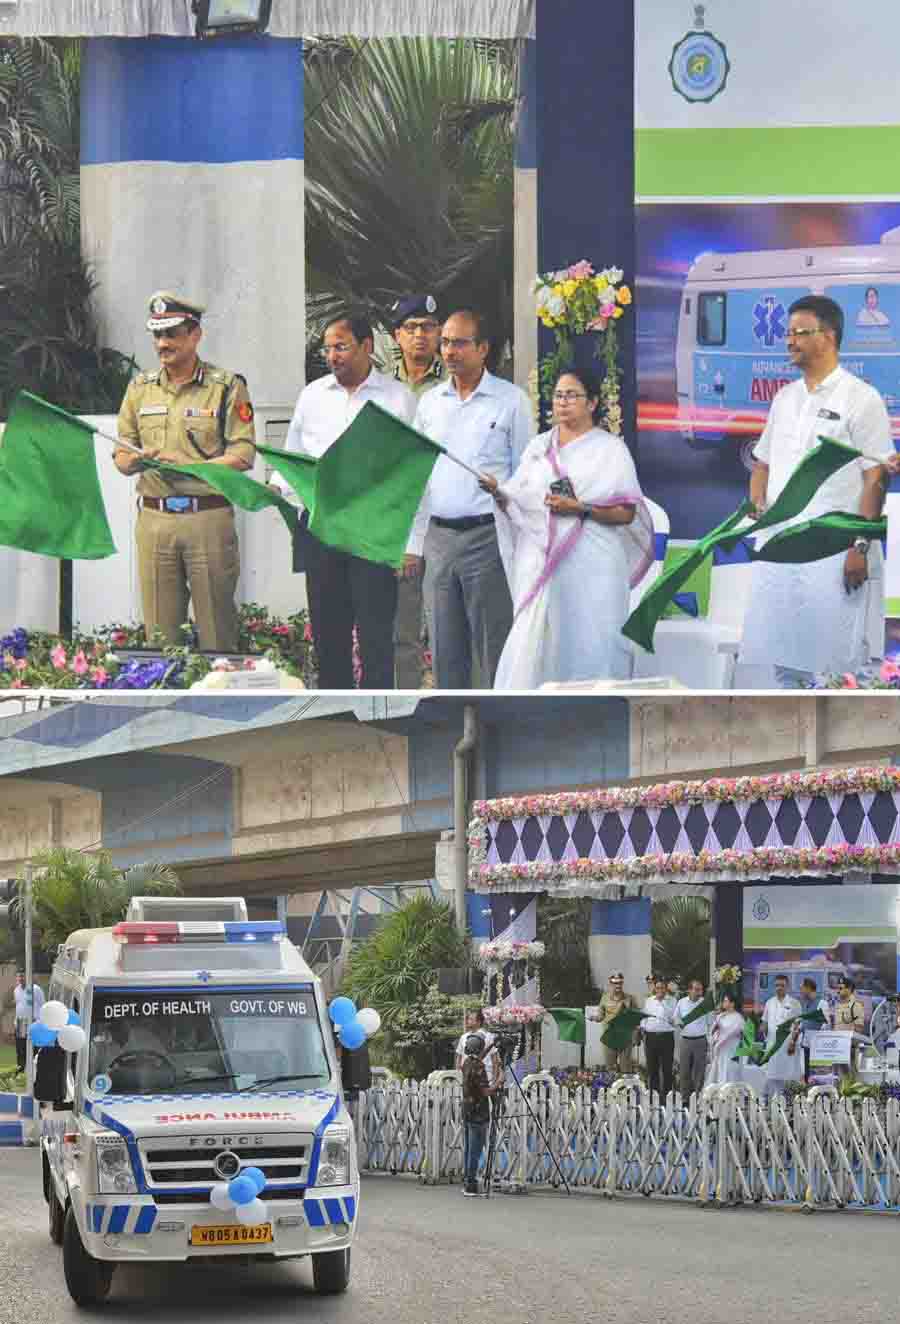 Chief Minister Mamata Banerjee inaugurated 30 new advanced life support ambulances from Nabanna on Monday. These ambulances come with oxygen support, portable suction, and trauma-care facilities. These will be available at all districts of Bengal. Mayor Firhad Hakim was also present at the event      